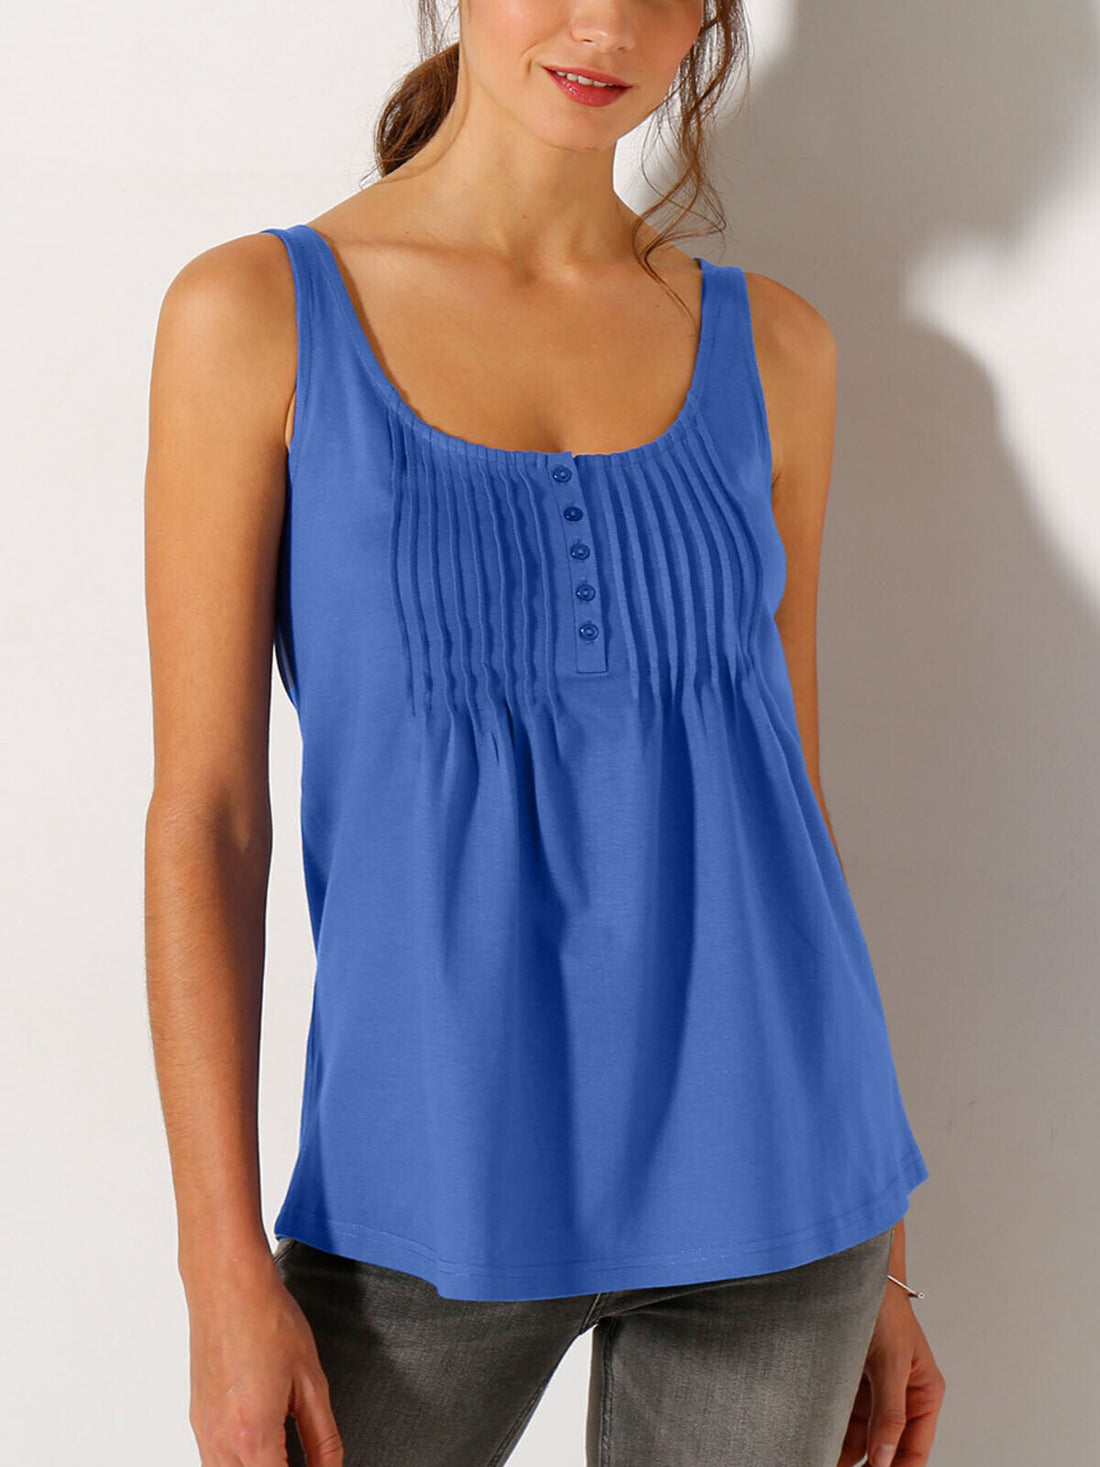 Blancheporte Azure-Blue Sleeveless Pintuck Vest Top in Sizes 14/16 or 18/20